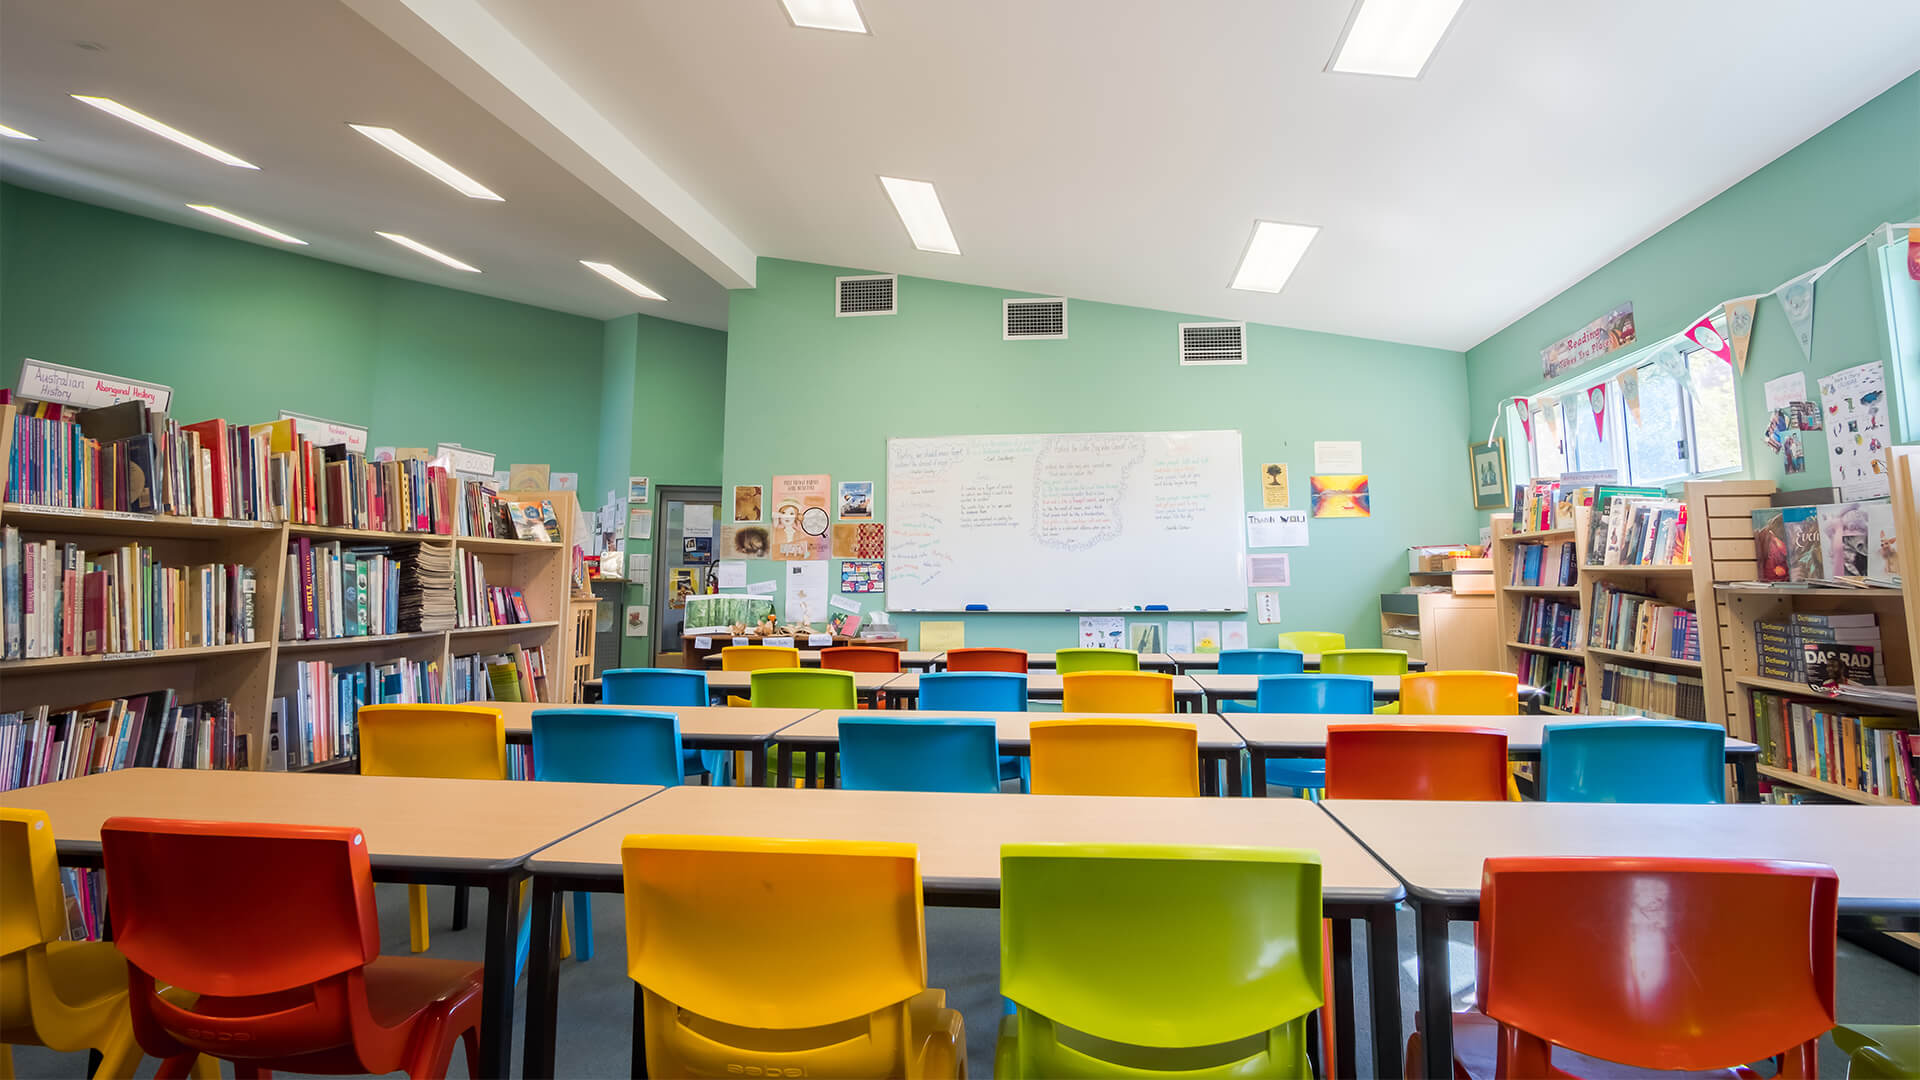 How Does the Interior Design of Schools Impact the Students' Mood - Build Magazine